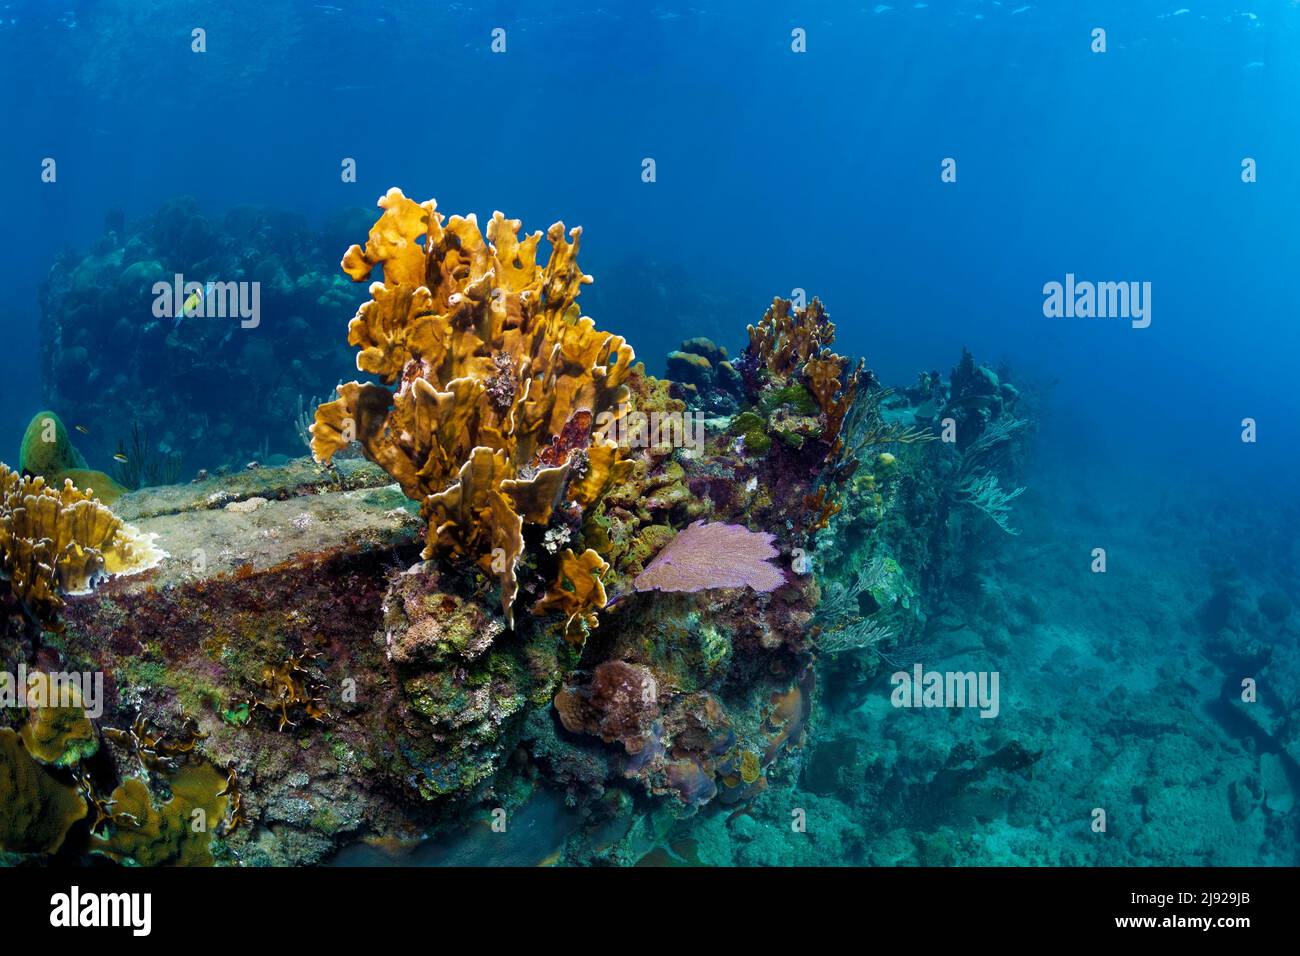 Shipwreck, overgrown with plate fire coral (Millepoara complanata), wreck on sandy bottom, Spanish armoured cruiser Christobal Colon, run aground Stock Photo